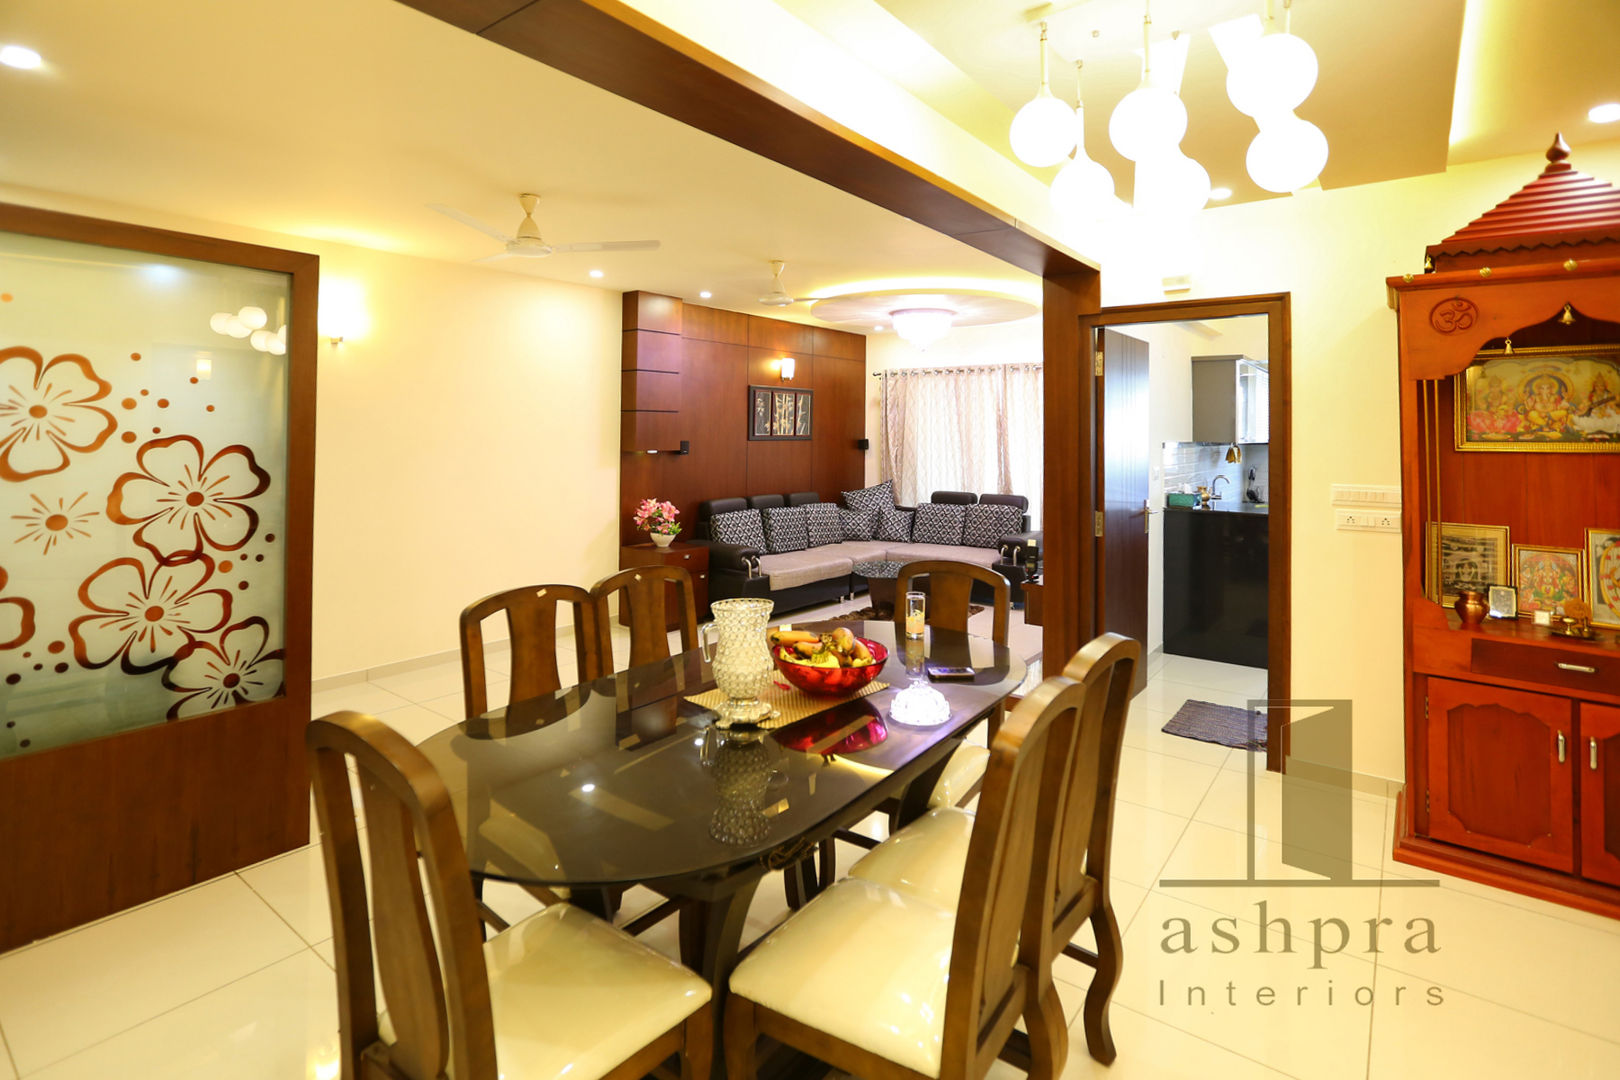 Interior work for a 2 bedroom apartment @ Mangalore.., Ashpra interiors Ashpra interiors غرفة السفرة طاولات